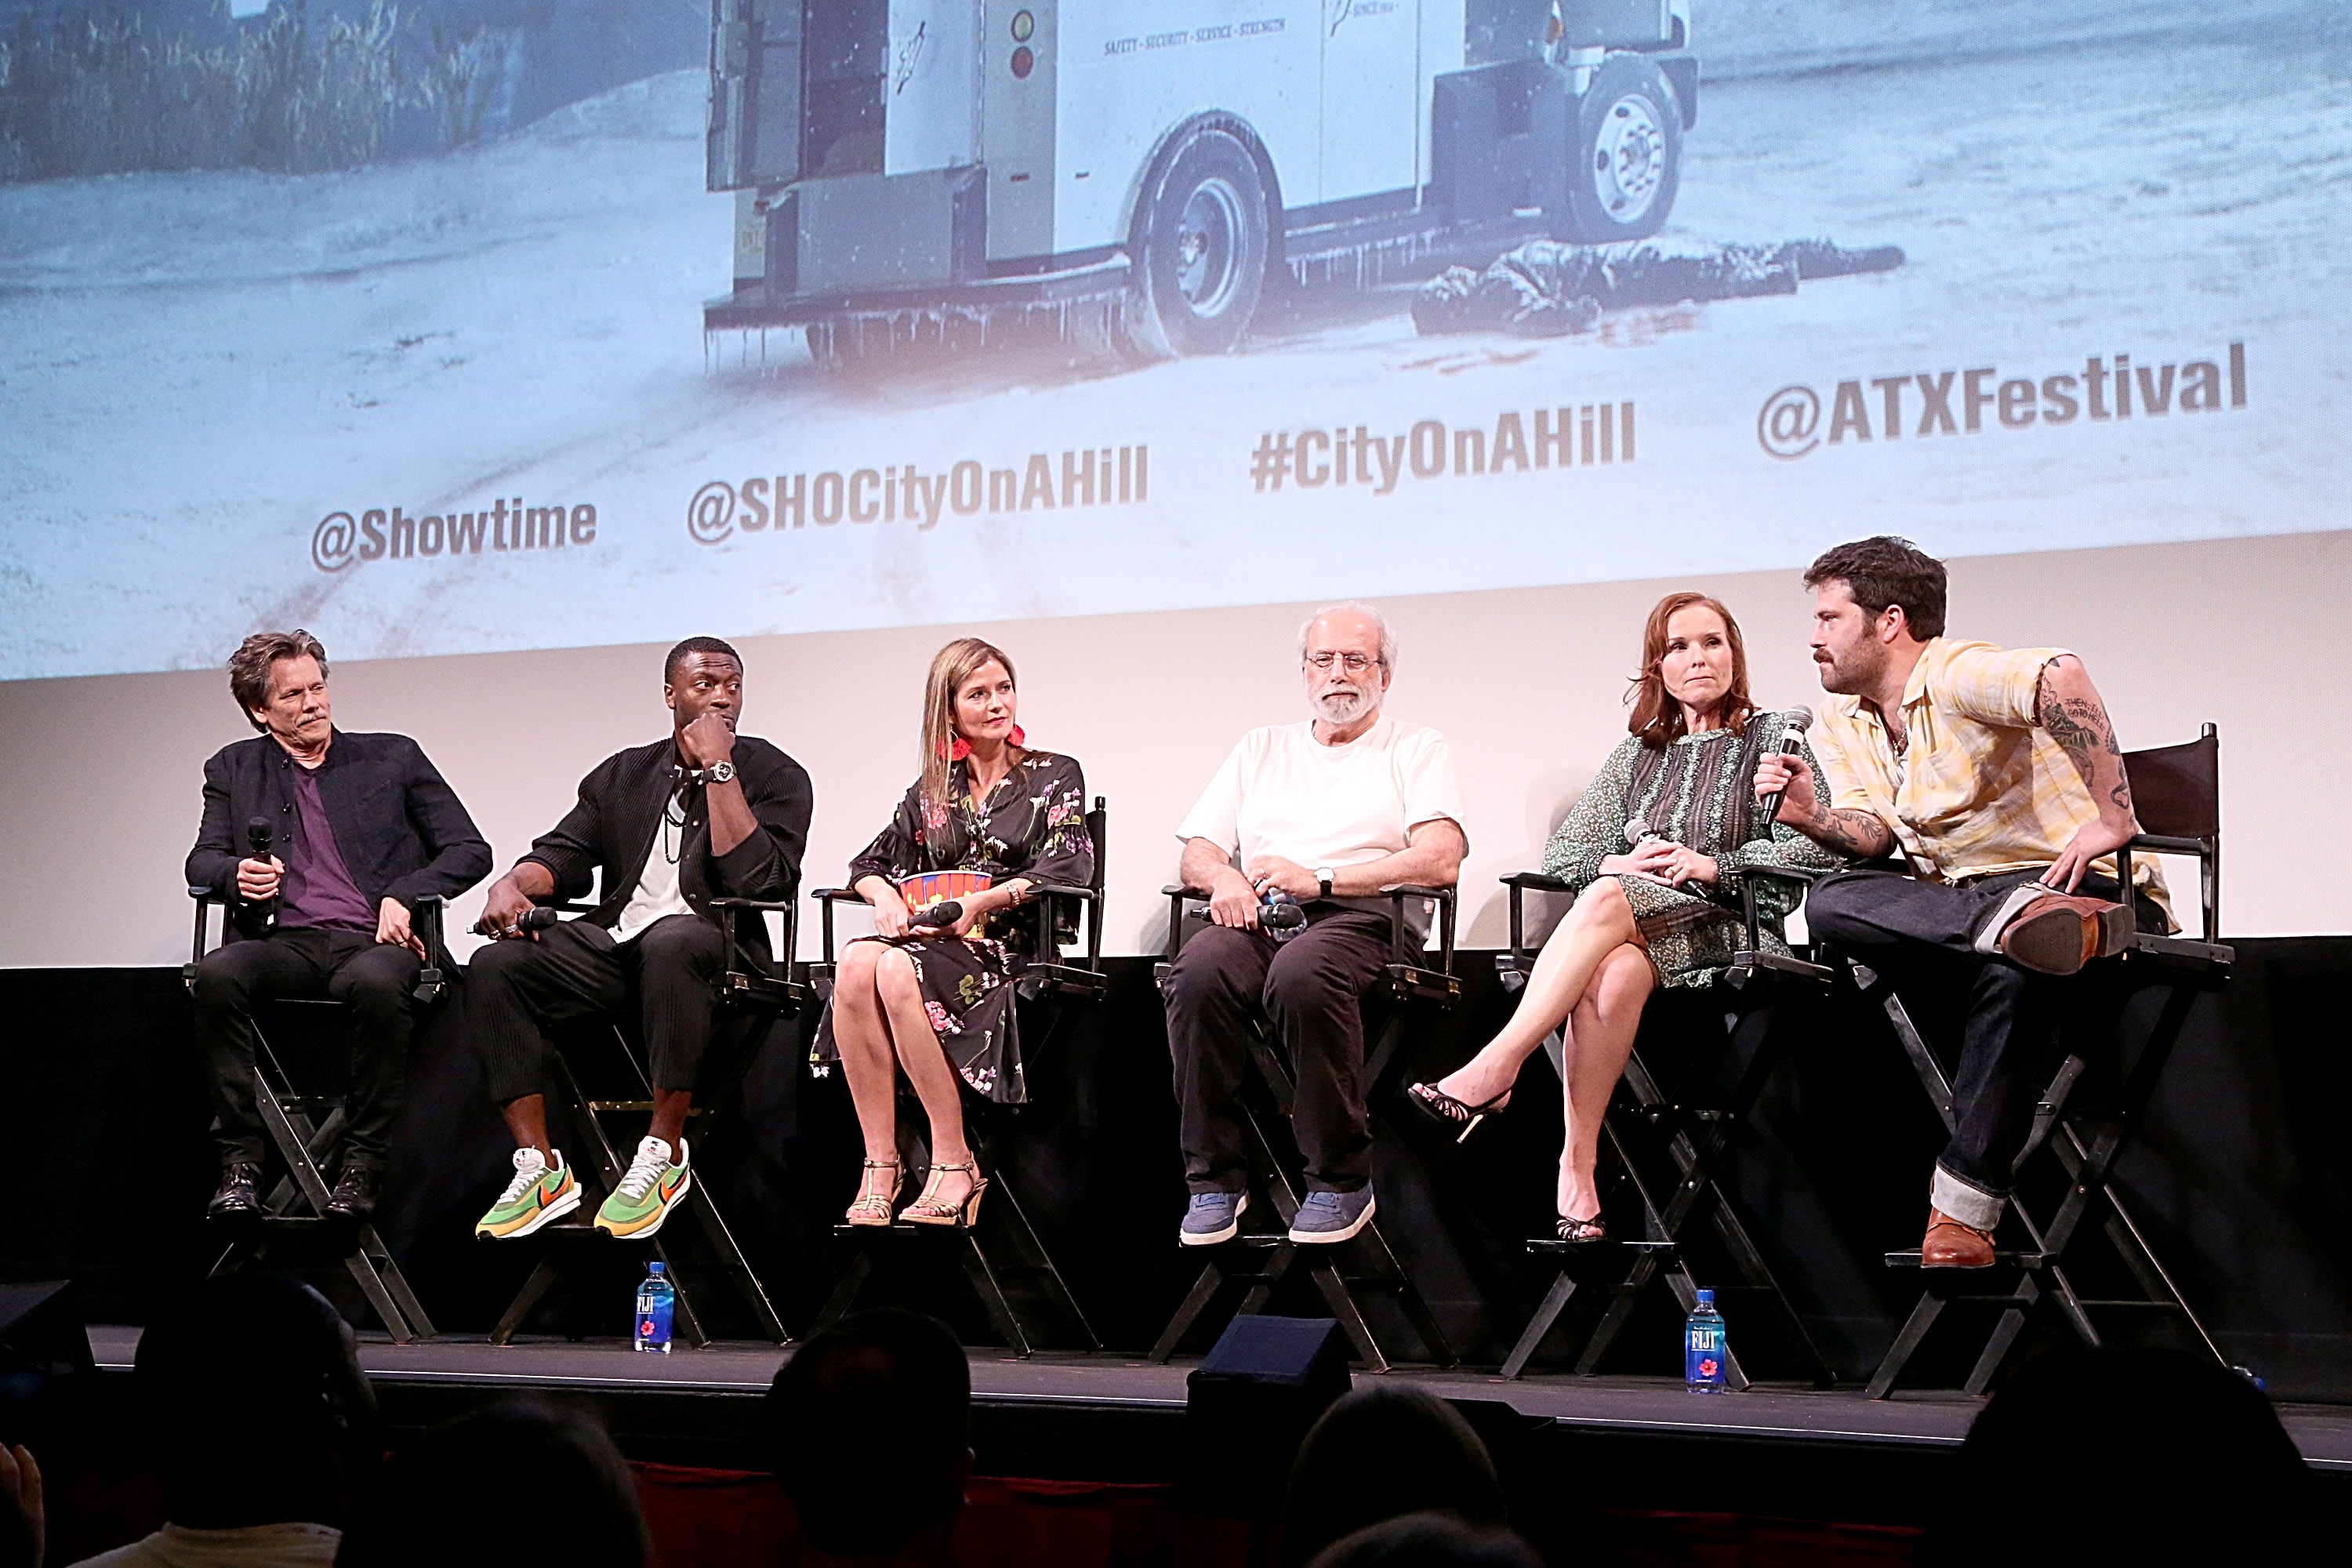 (L - R) Kevin Bacon, Aldis Hodge, Jill Hennessy, Tom Fontana, Jennifer Todd and Chuck MacLean speak onstage during the premiere of "City On A Hill" at the Paramount Theatre during the ATX Television Festival, on June 8, 2019 in Austin, Texas. | Source: Getty Images